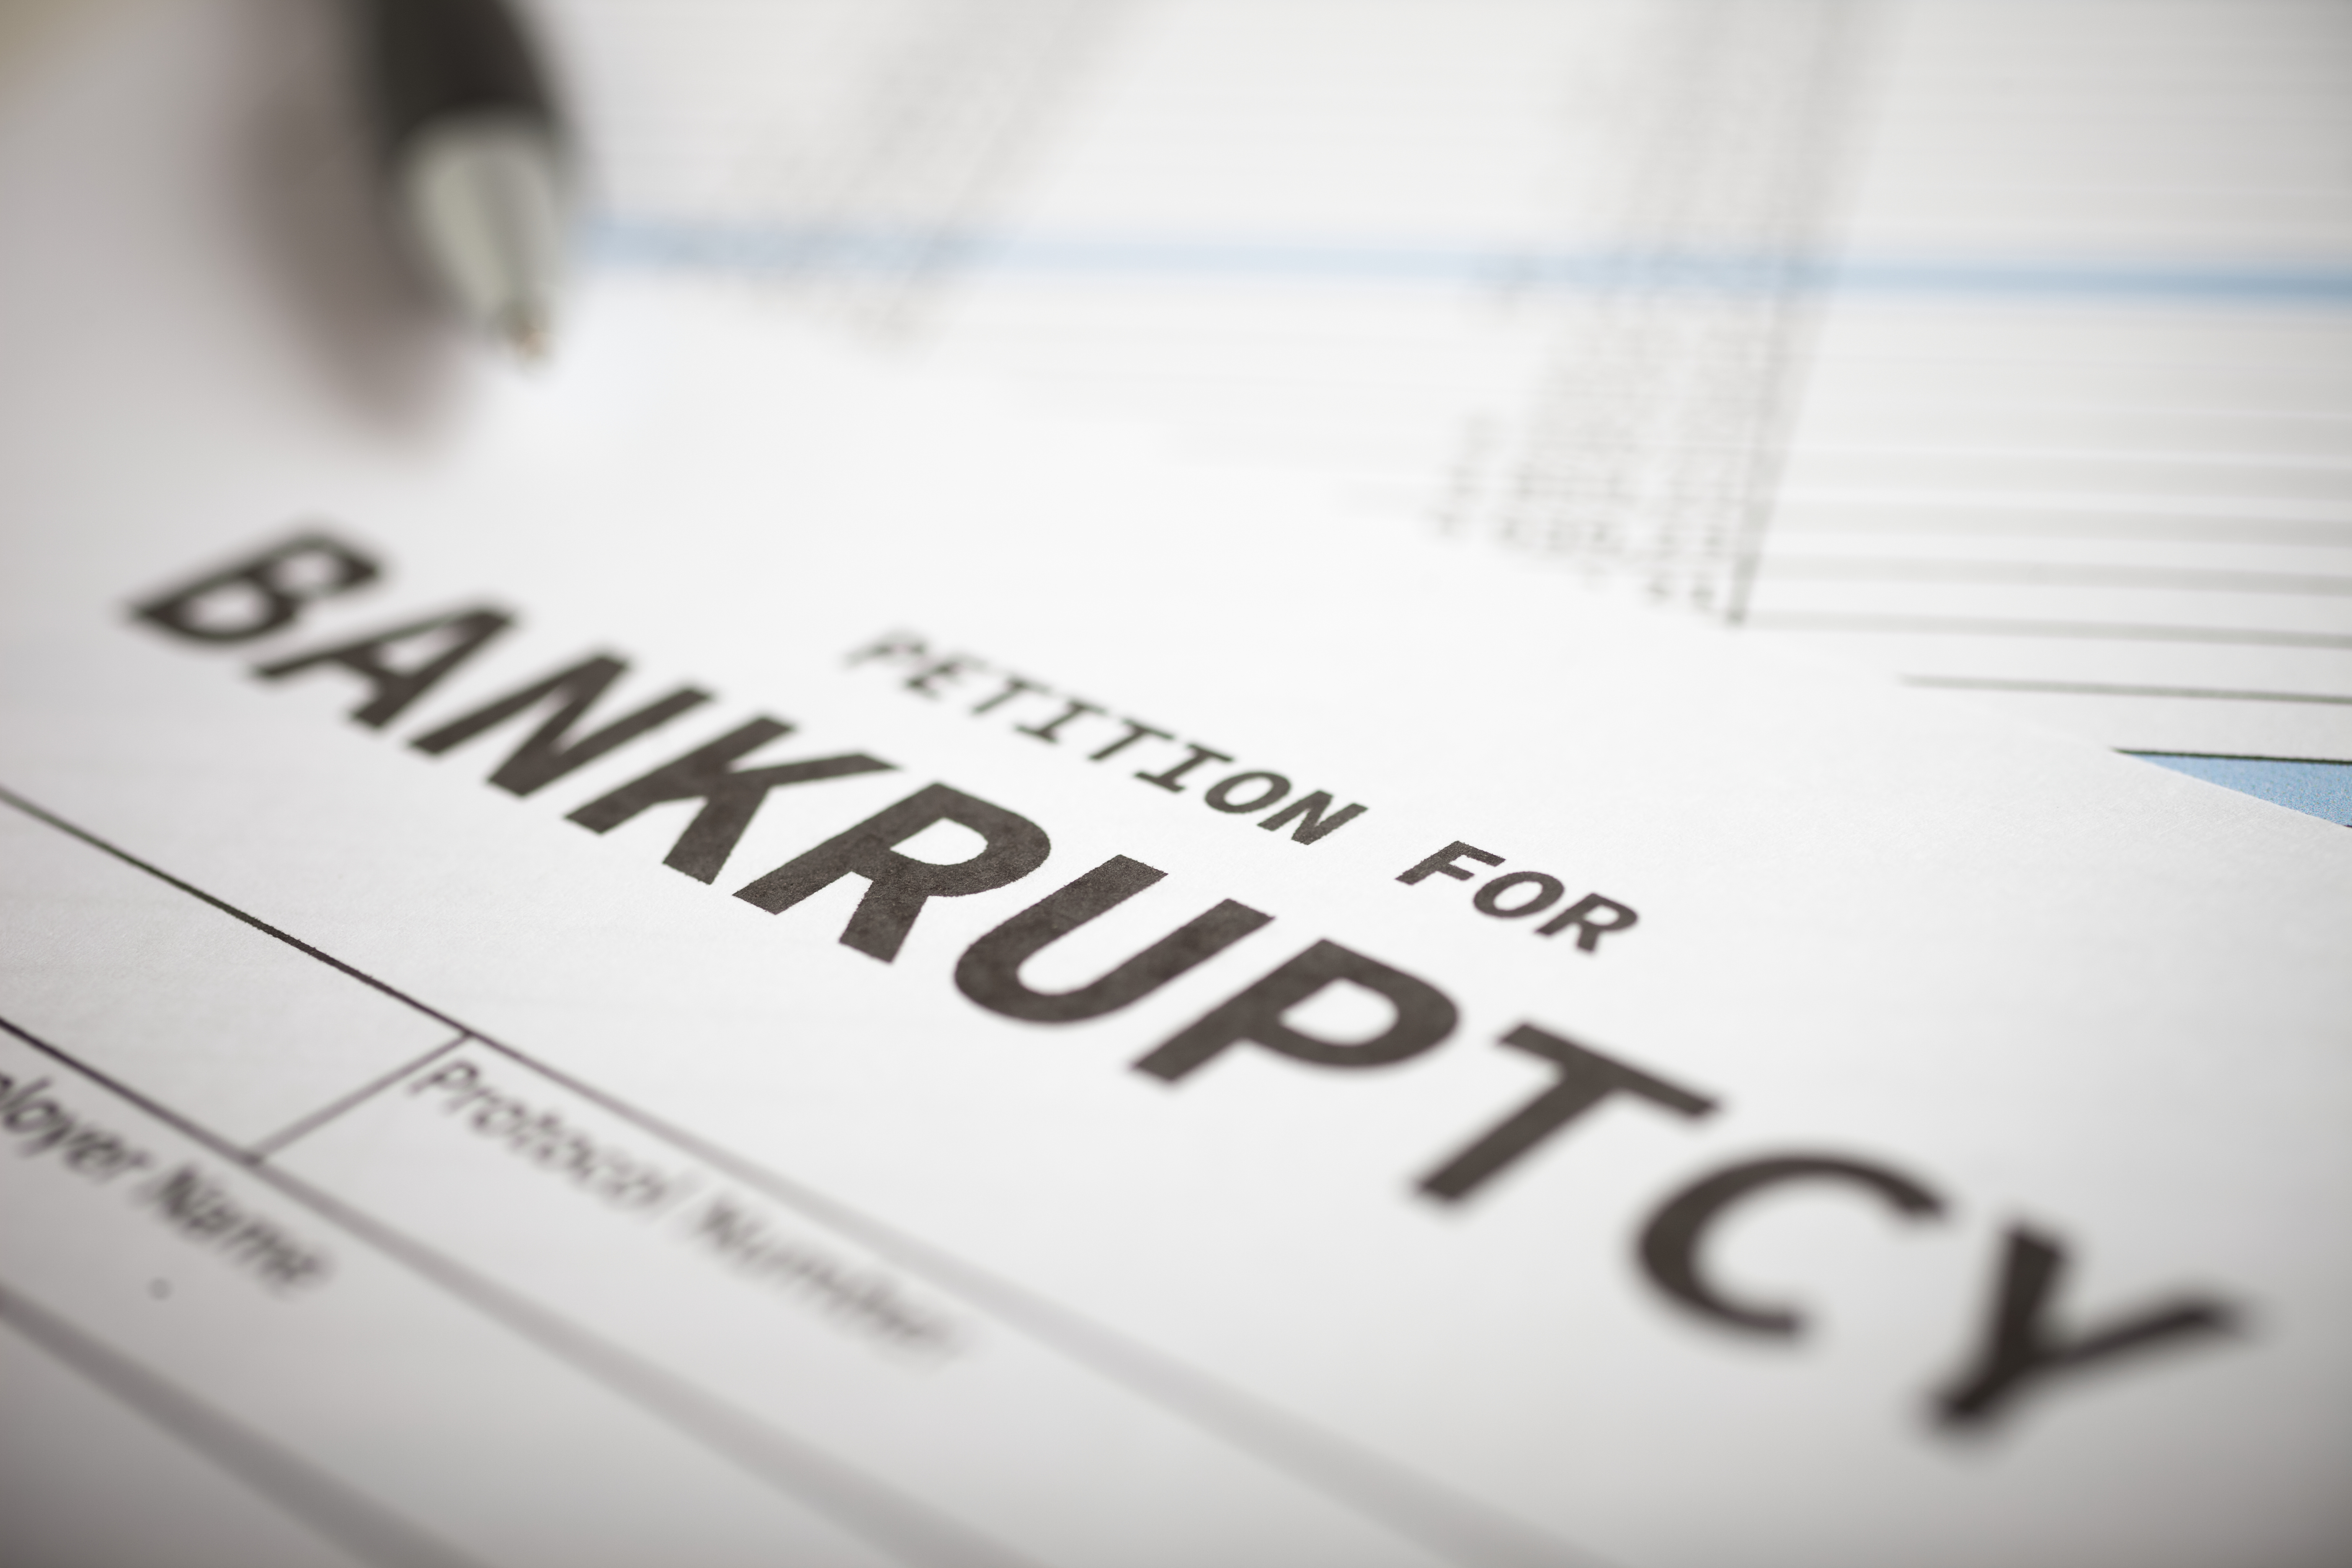 Price Law Group California Bankruptcy Attorneys Call 866-210-1722